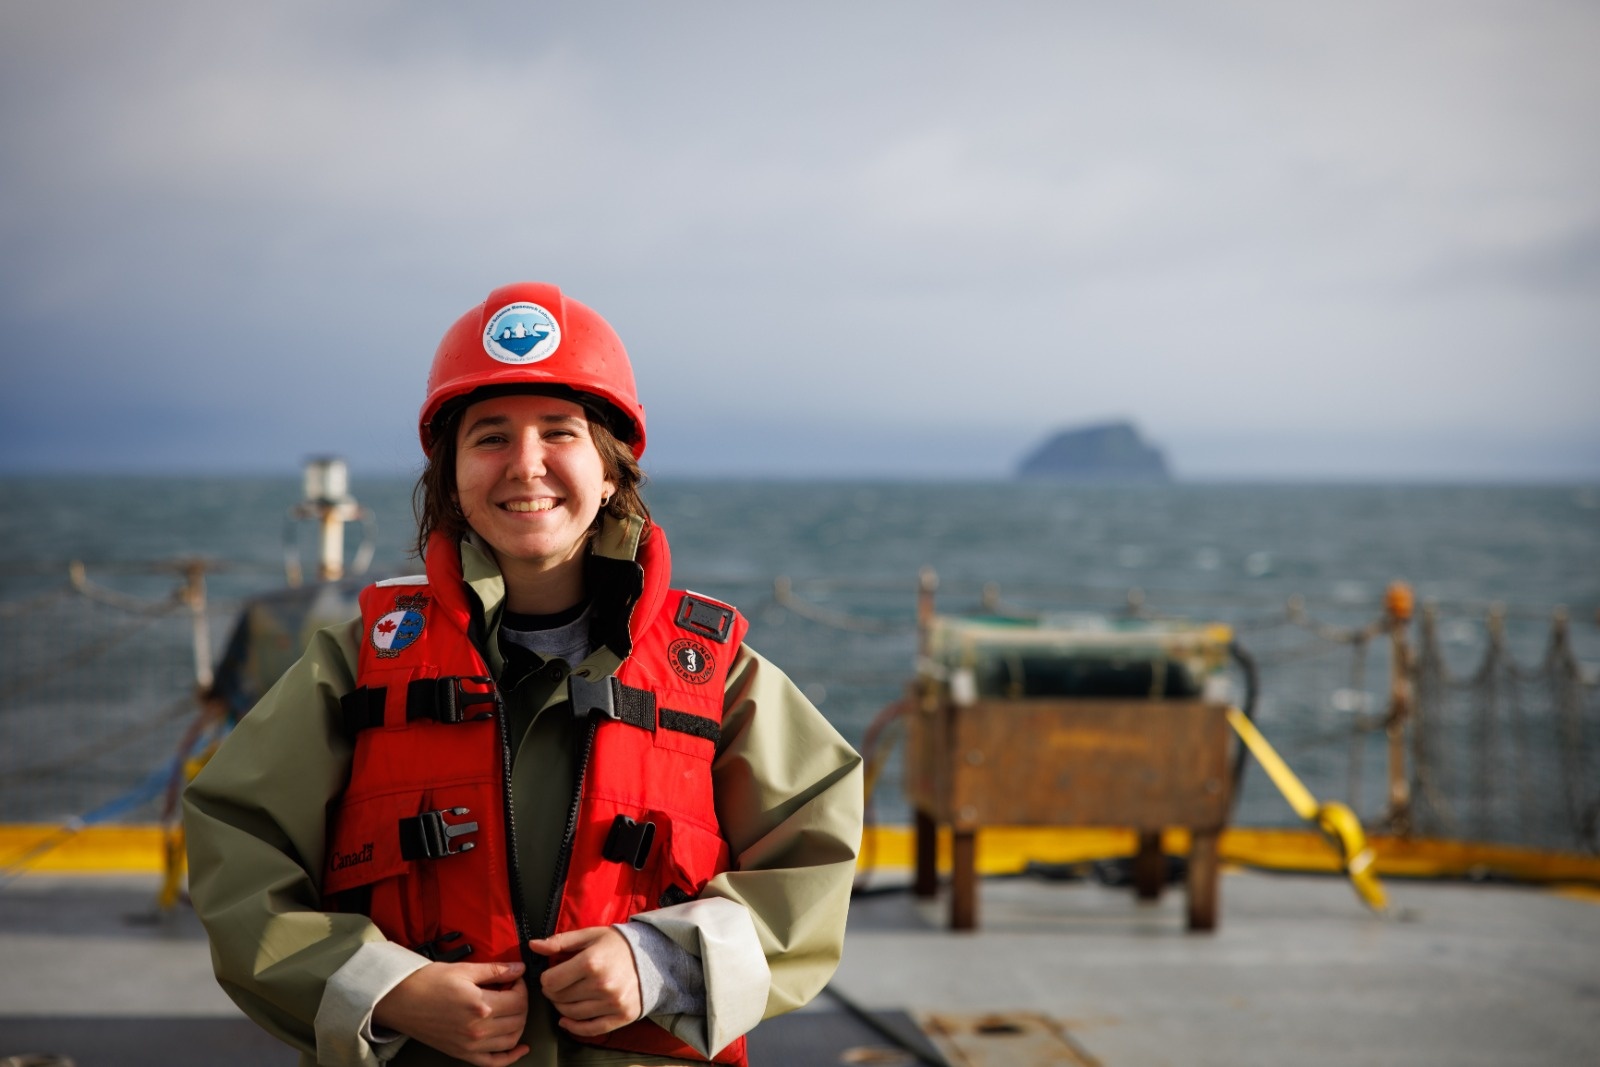 student wearing a life jacket and hard hat on a research vessel